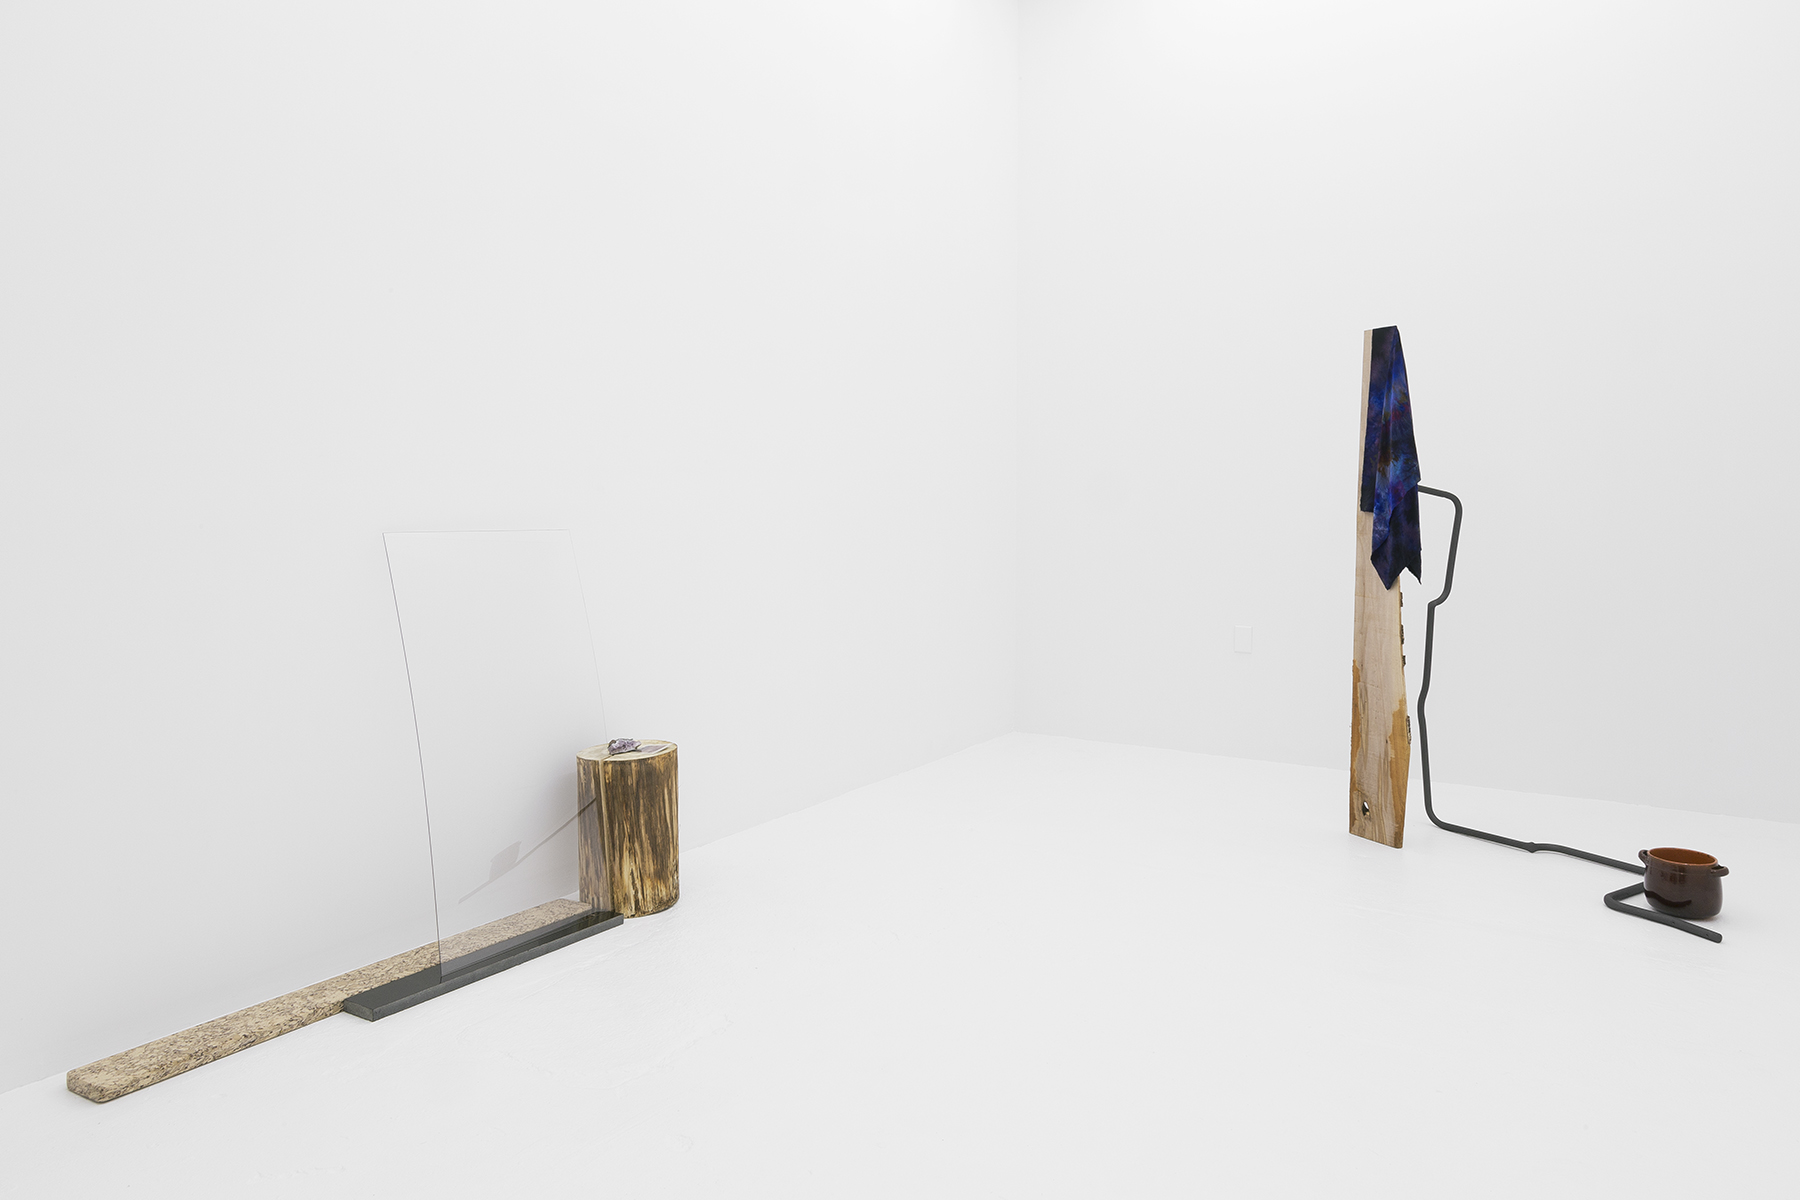  Connor McNicholas  "A Center Such as This" Installation view 